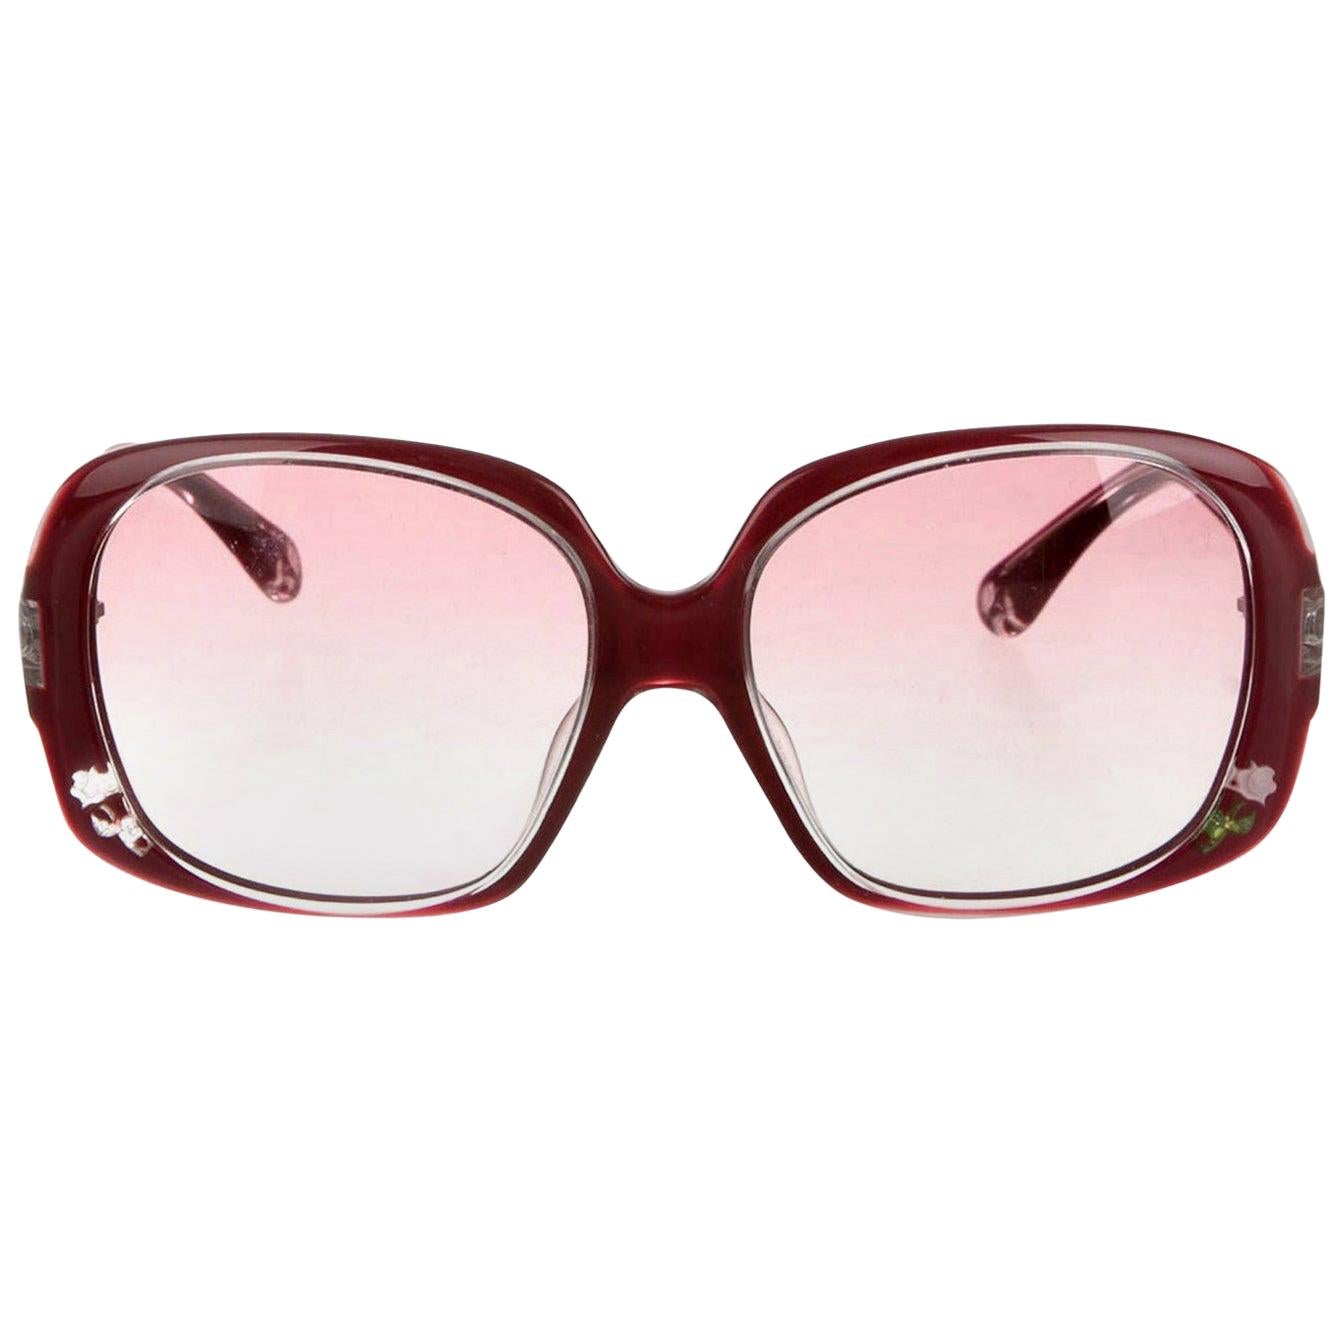 New Fendi Deep Red Rose Inlaid Sunglasses With Case